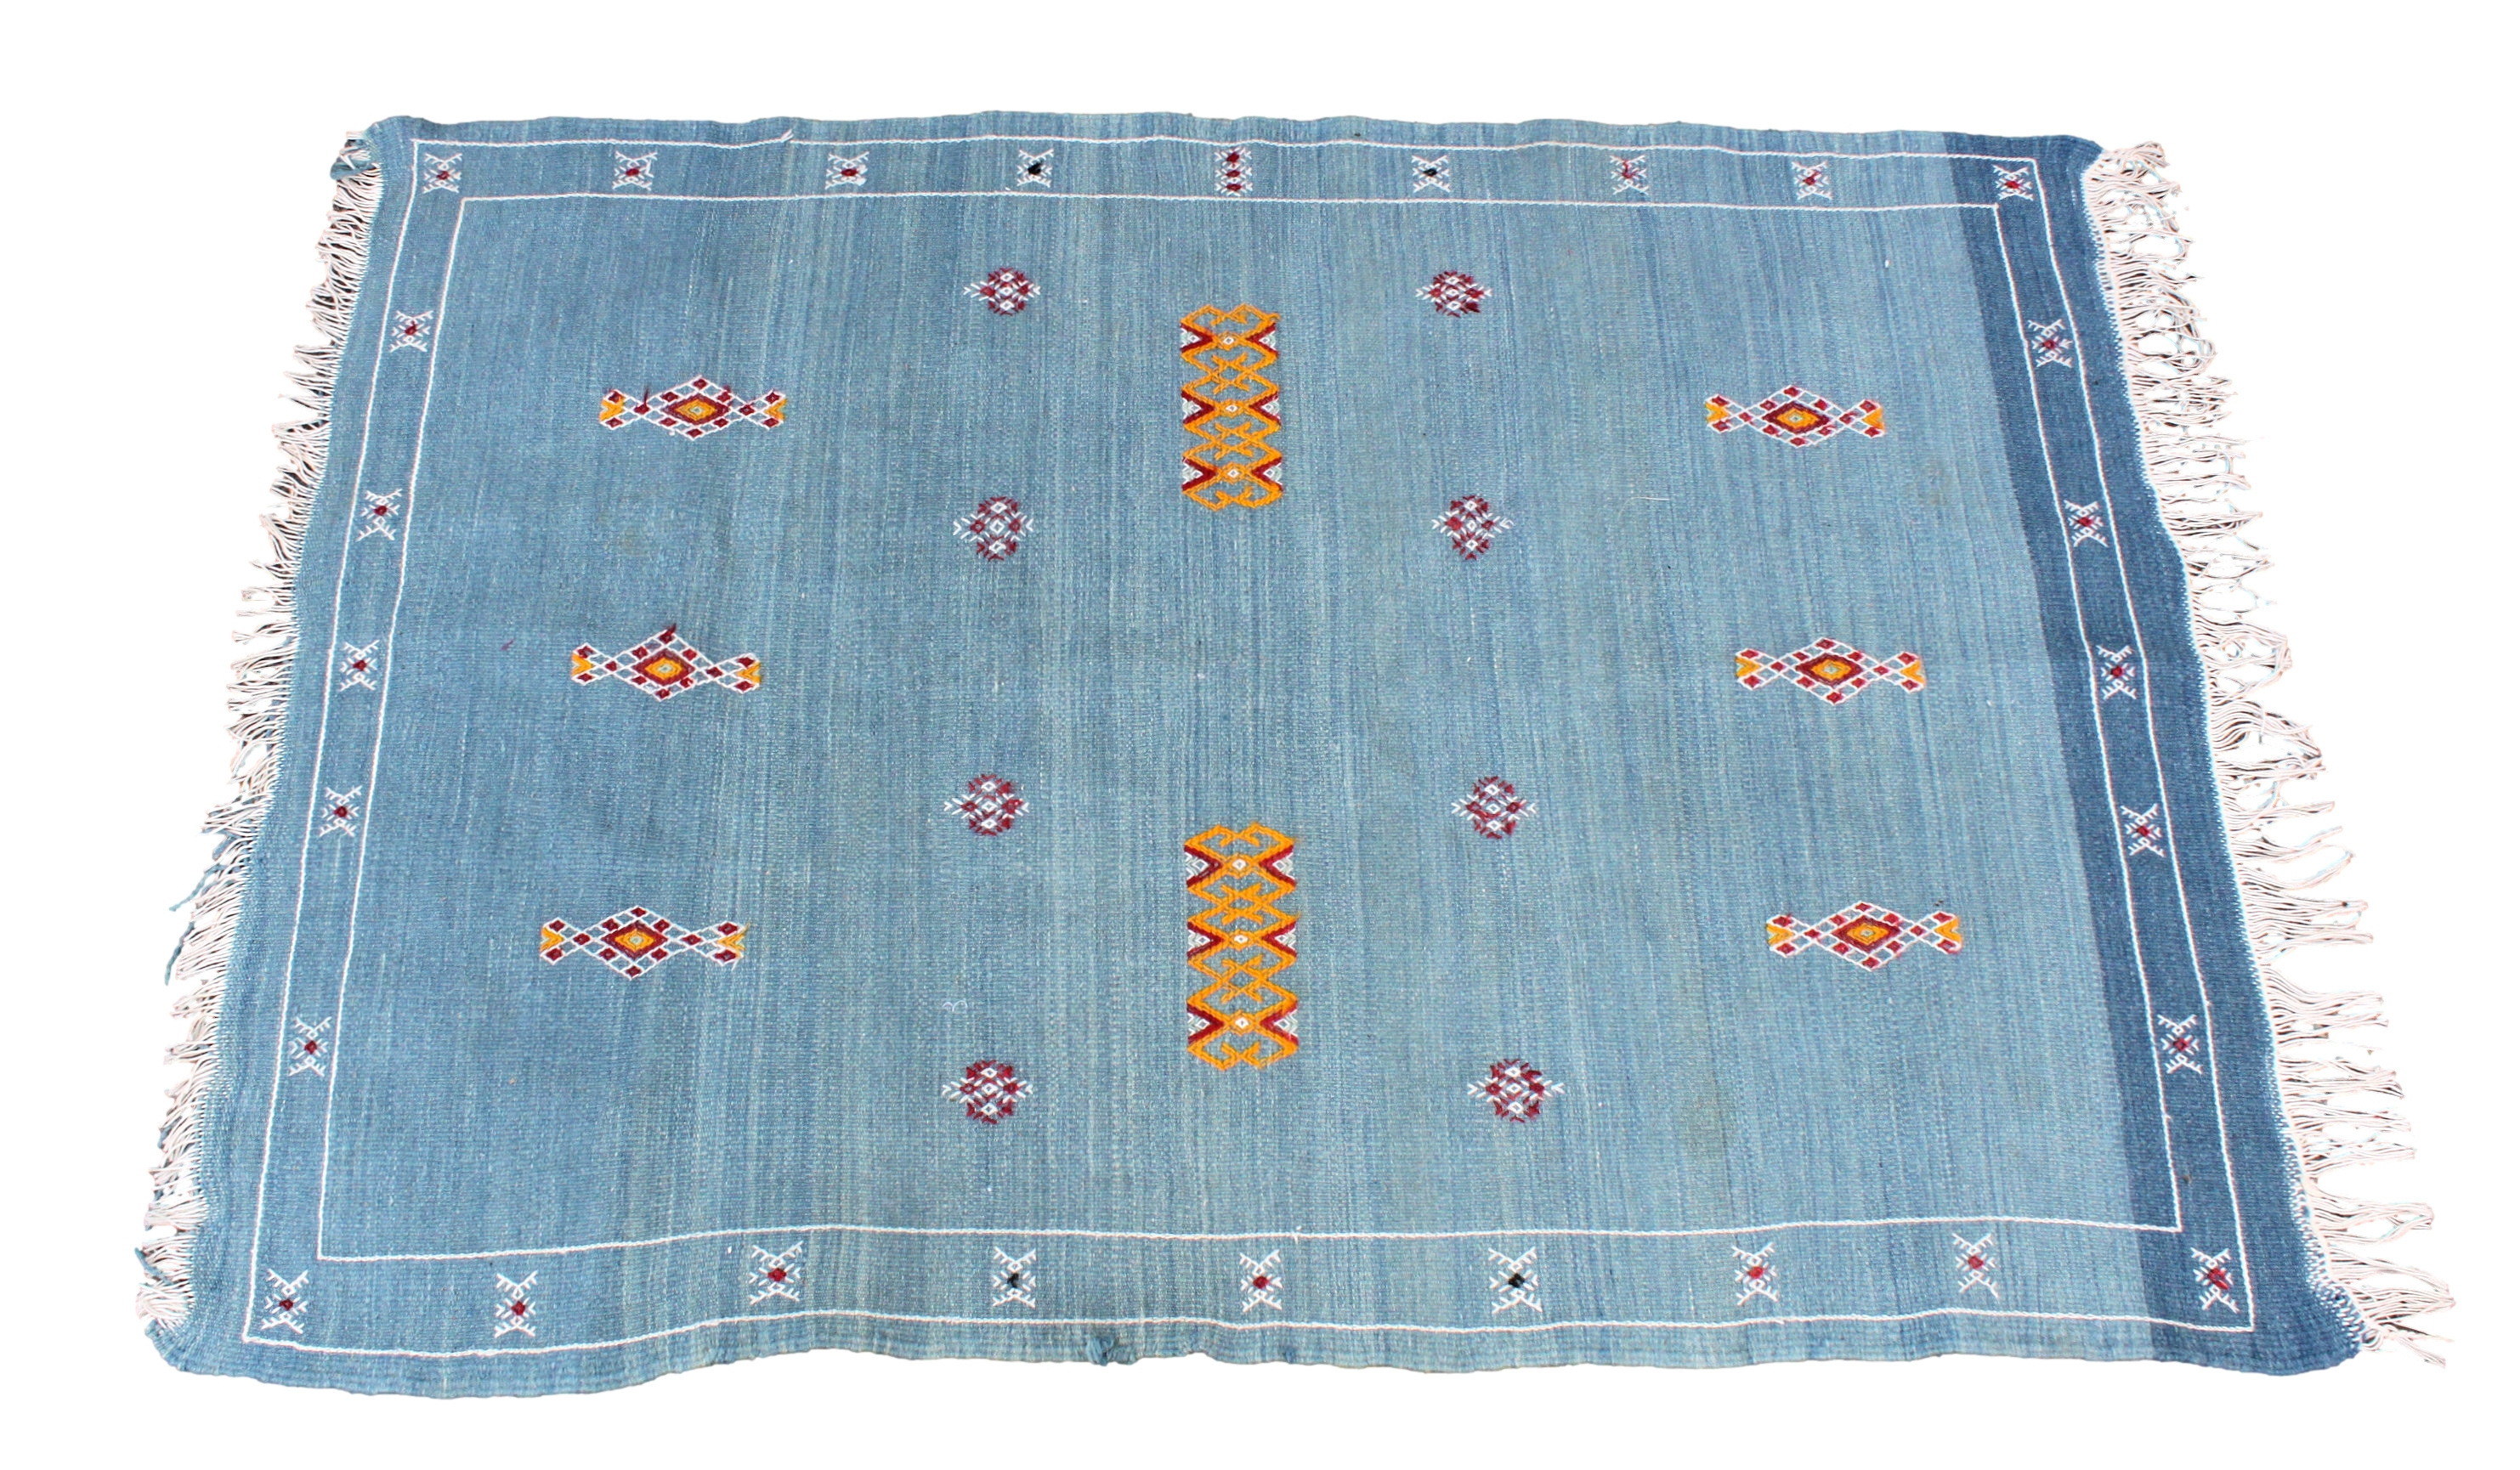 A Moroccan kilim rug, late 20th century, with small geometric motifs on a light blue ground, 56½ x